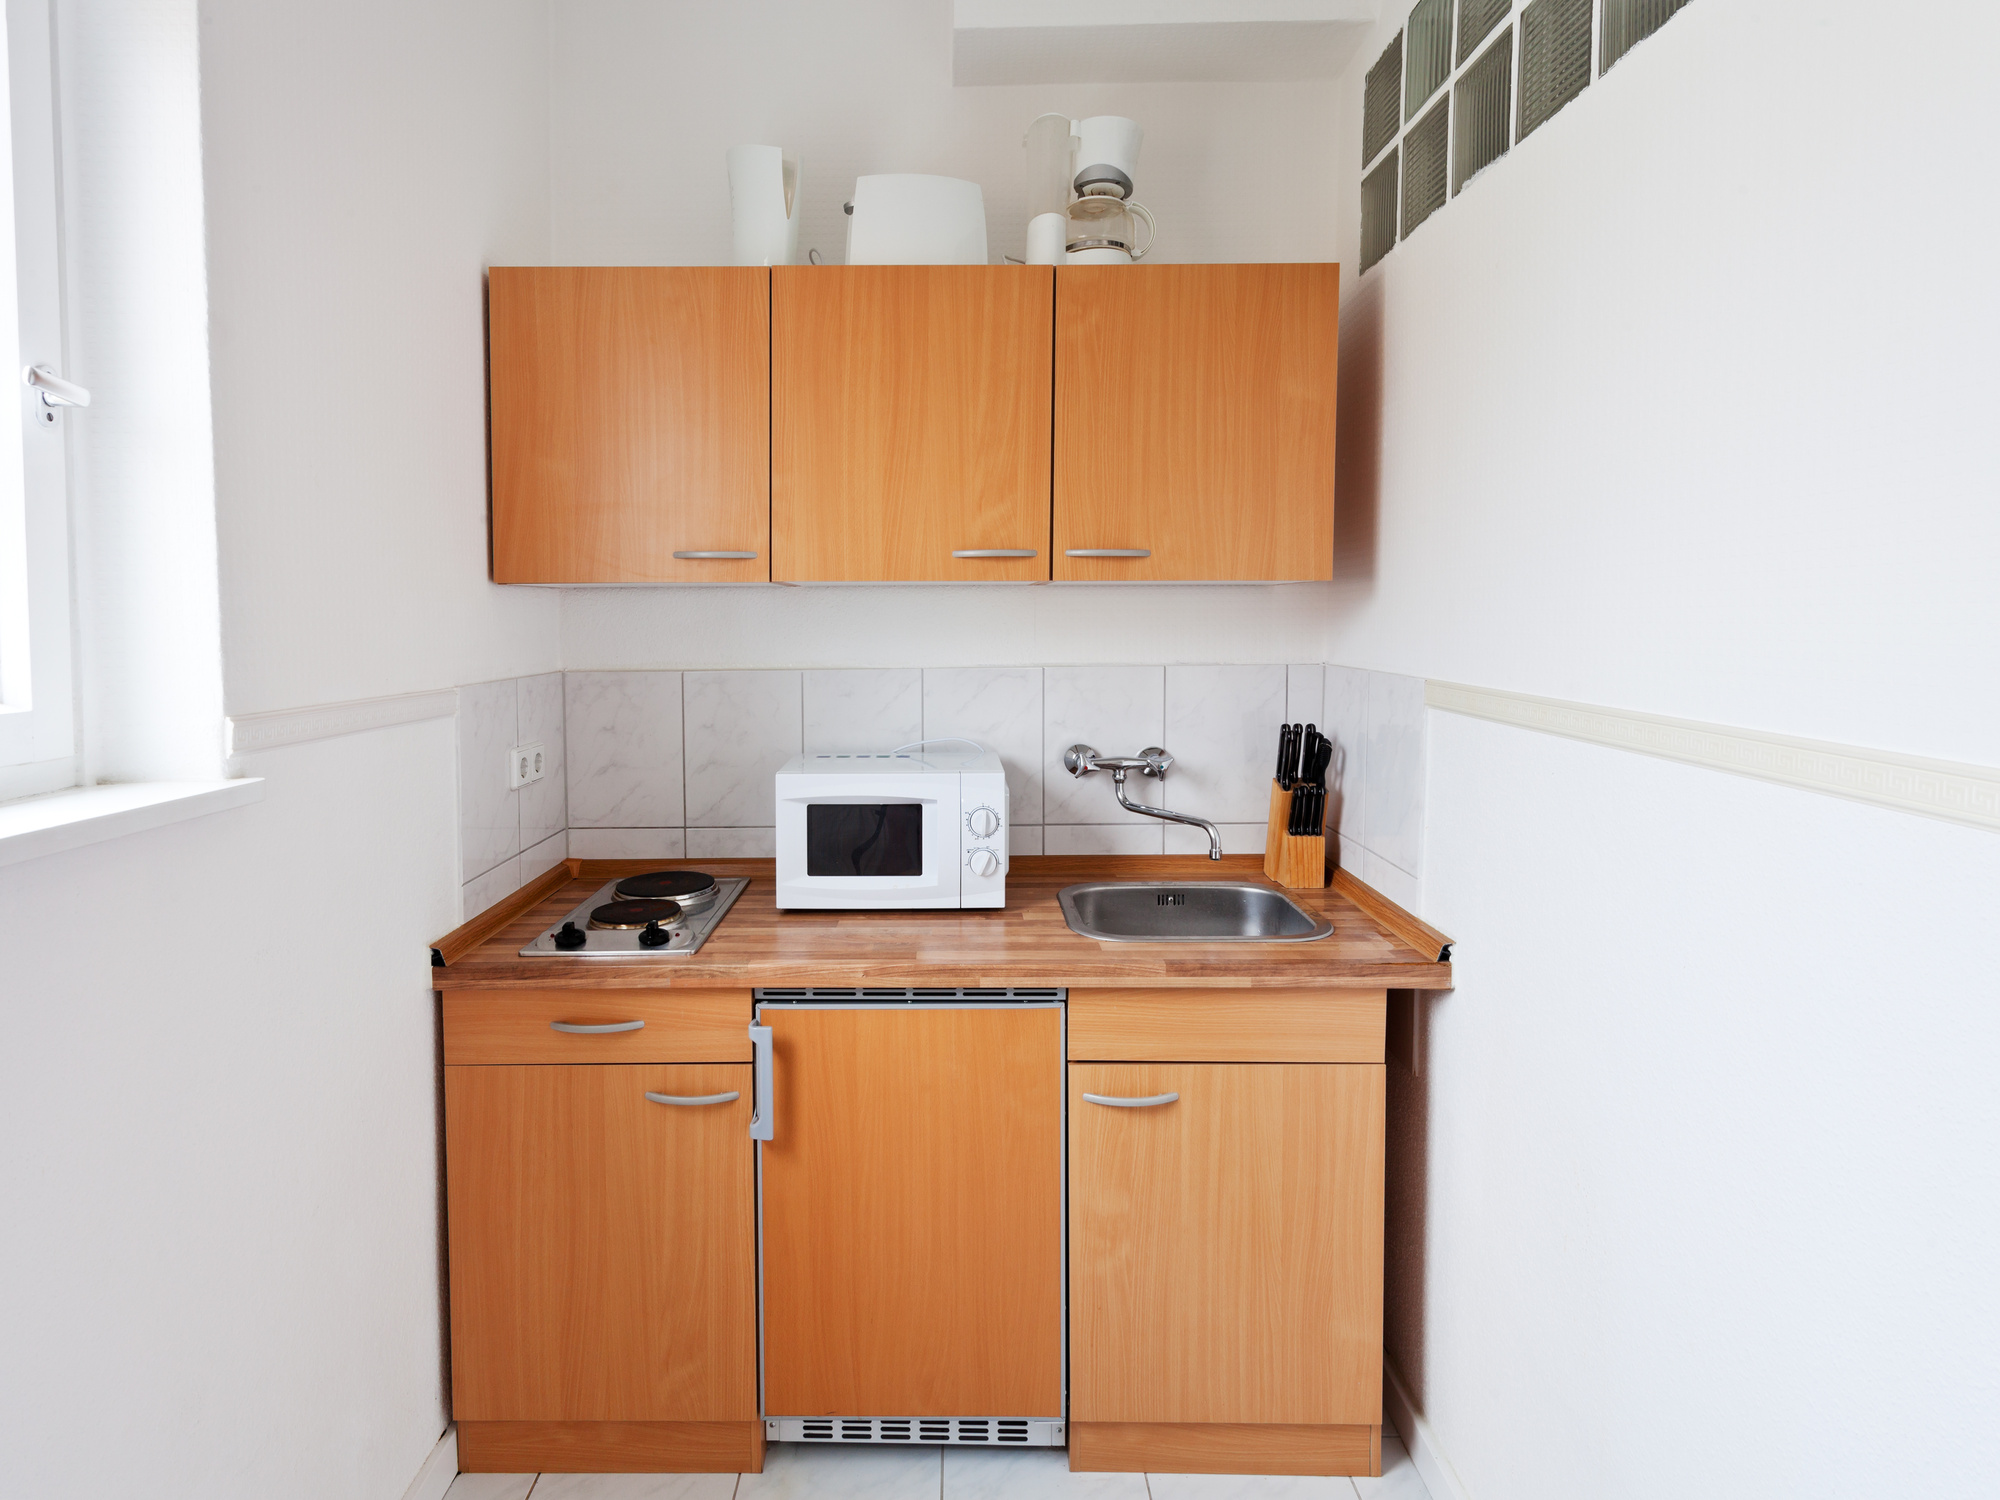 6 Small Kitchen Design Tips for a Tight Space